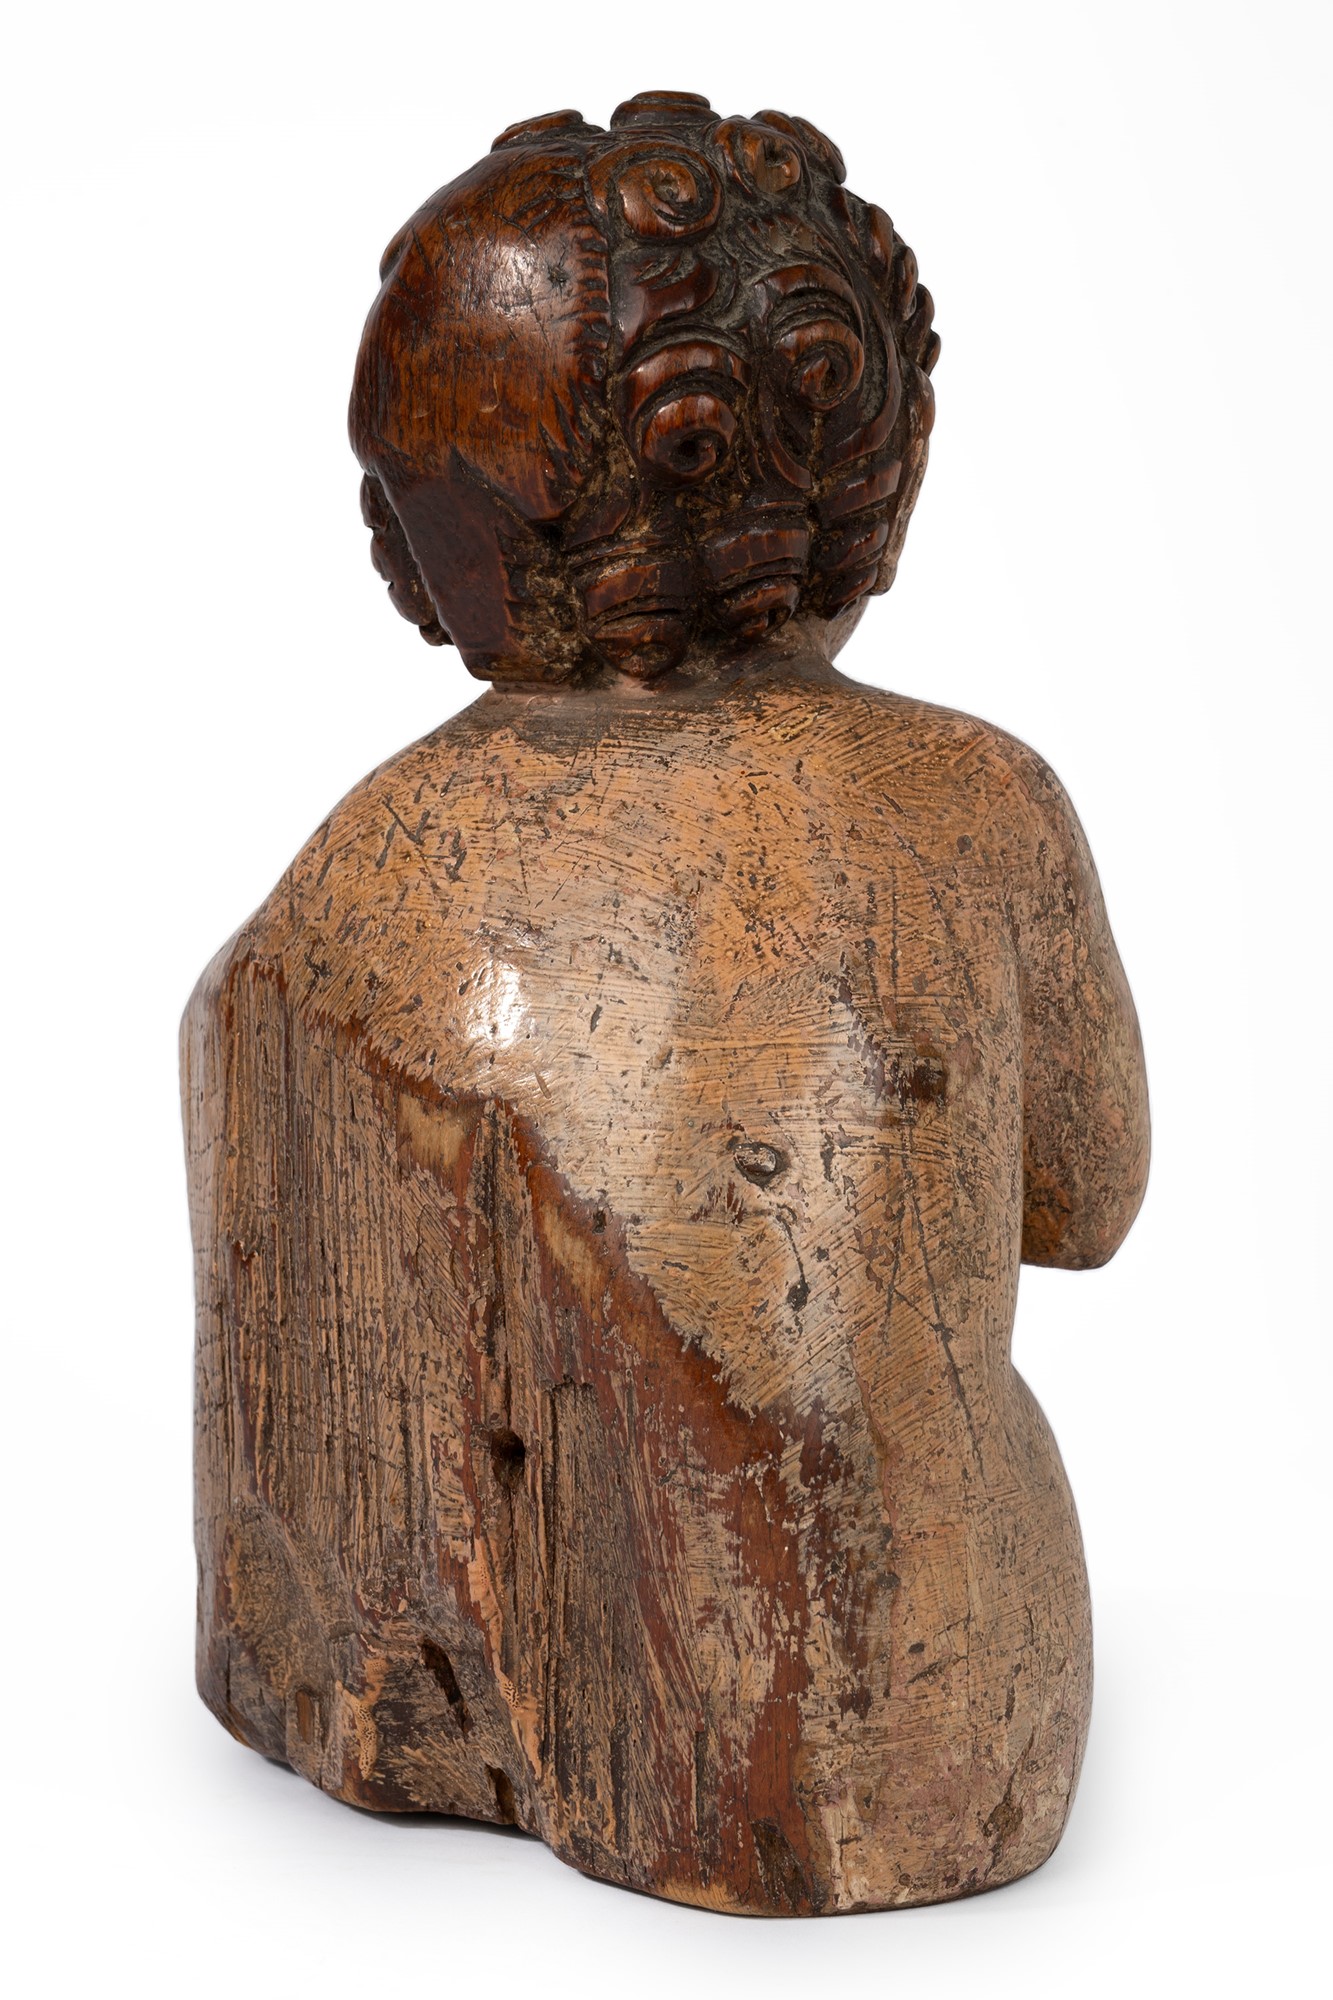 Polychrome wooden sculpture representing Baby Jesus with globe, 17th century - Image 3 of 6